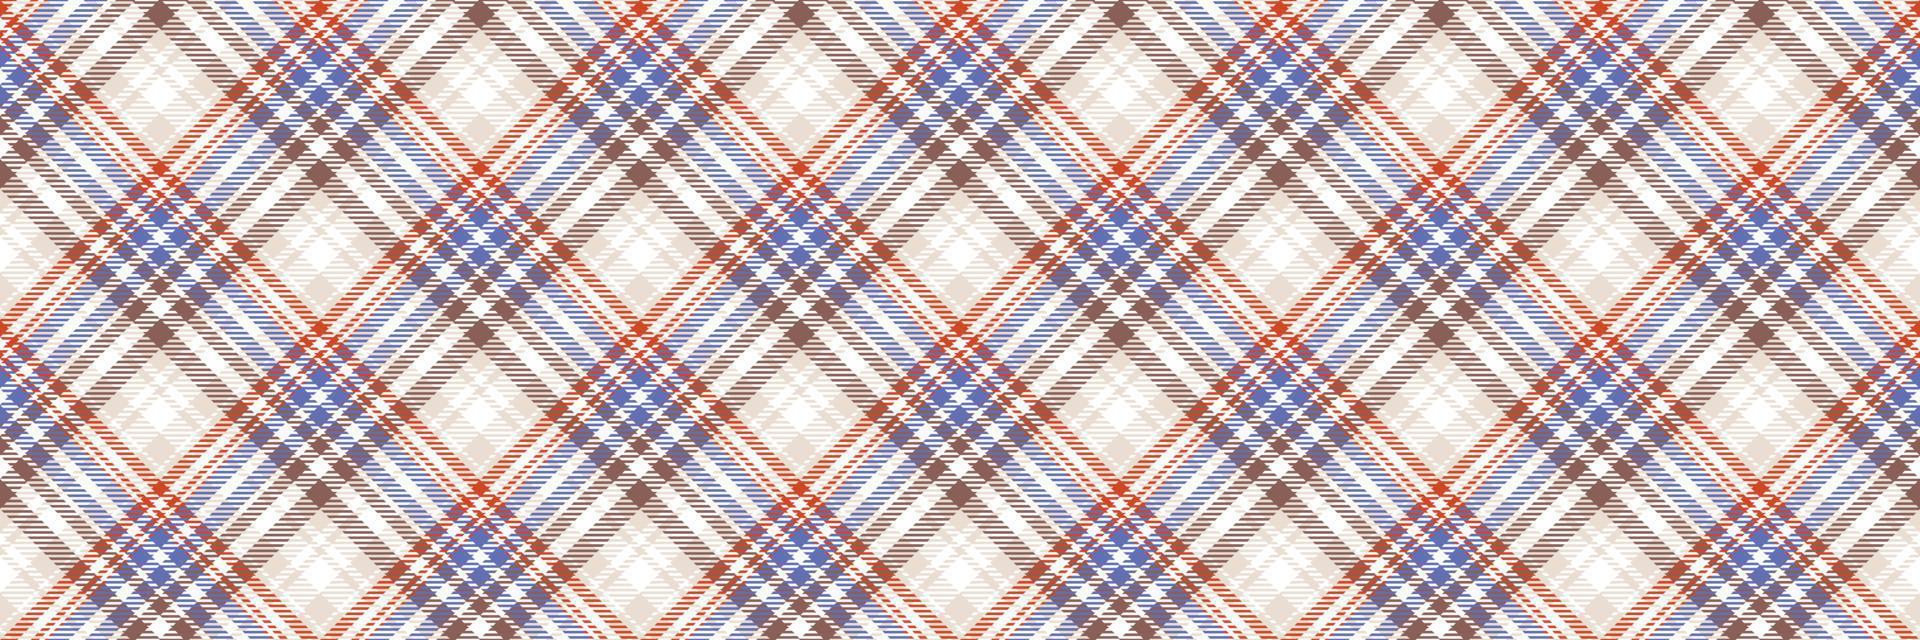 Check Plaid pattern is a patterned cloth consisting of criss crossed, horizontal and vertical bands in multiple colours.plaid Seamless for  scarf,pyjamas,blanket,duvet,kilt large shawl. vector